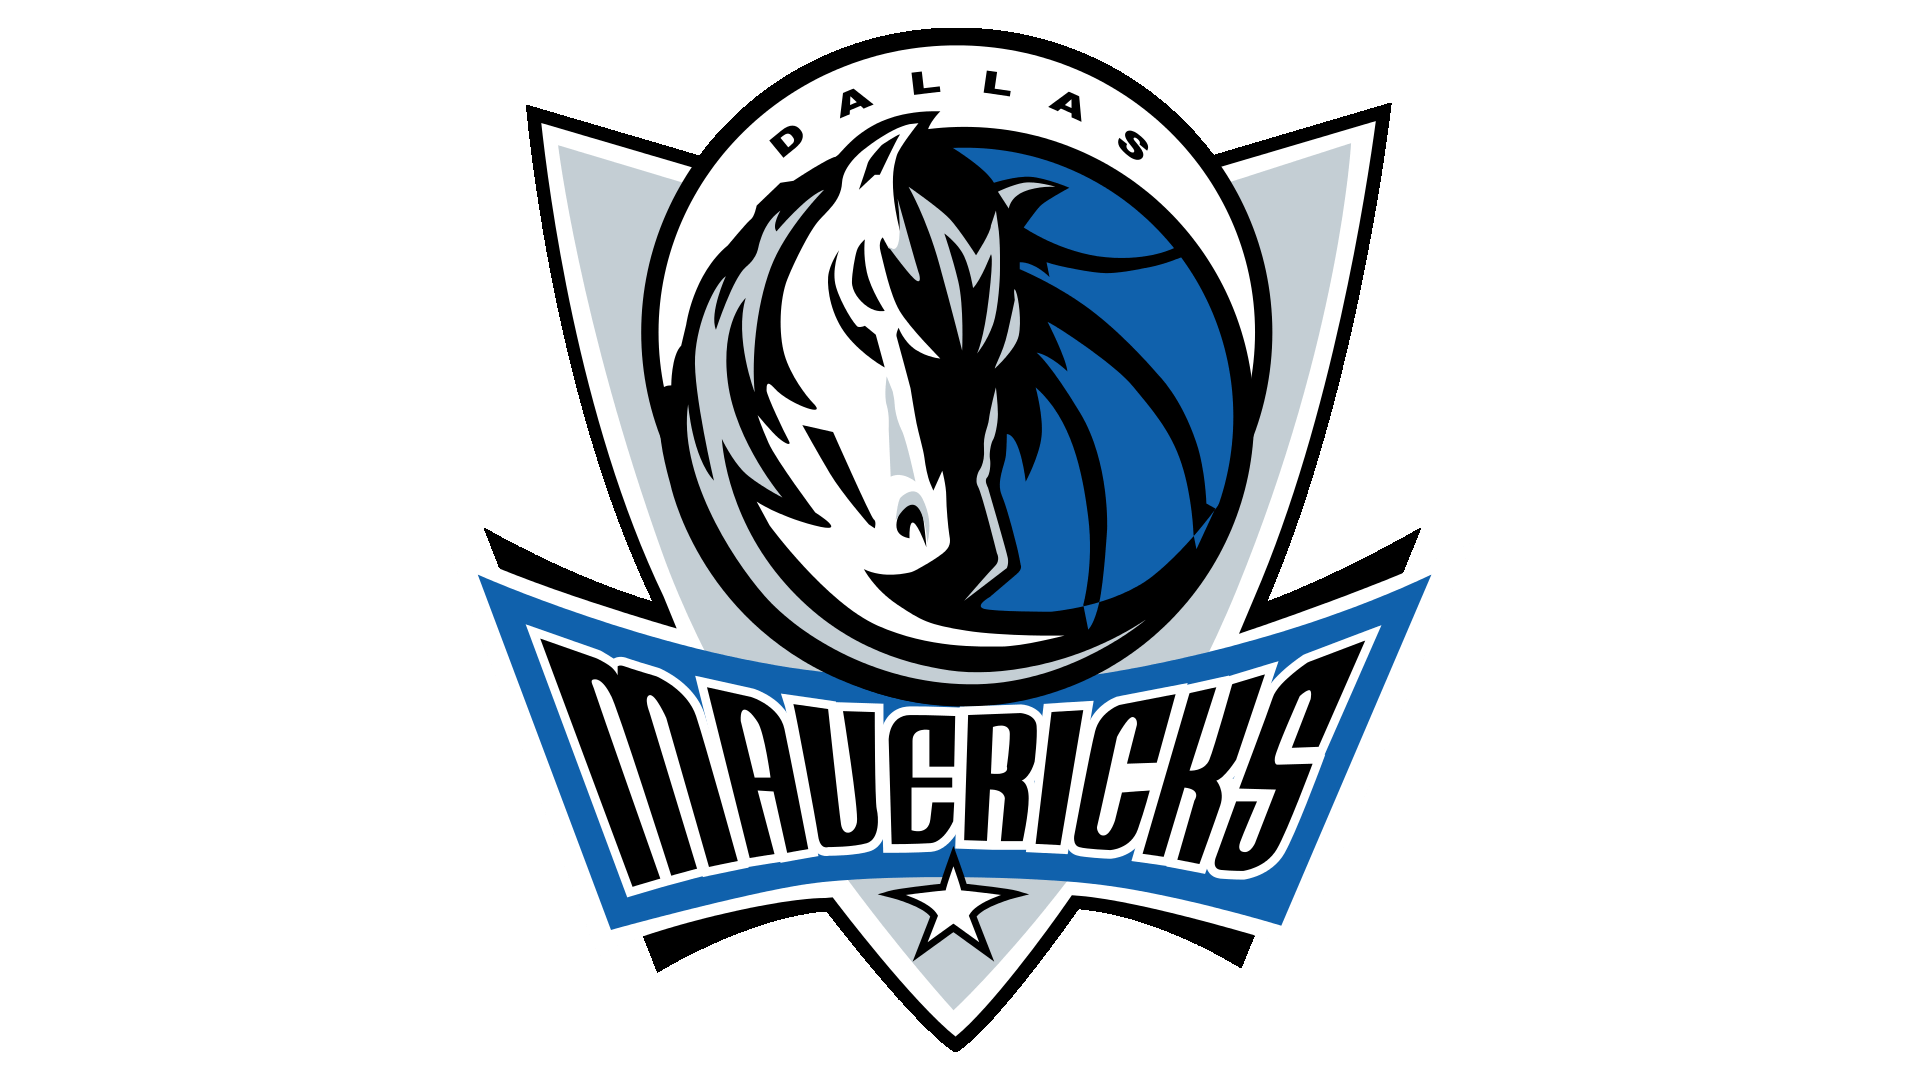 Mavericks Logo - Dallas Mavericks Logo, Dallas Mavericks Symbol, Meaning, History and ...